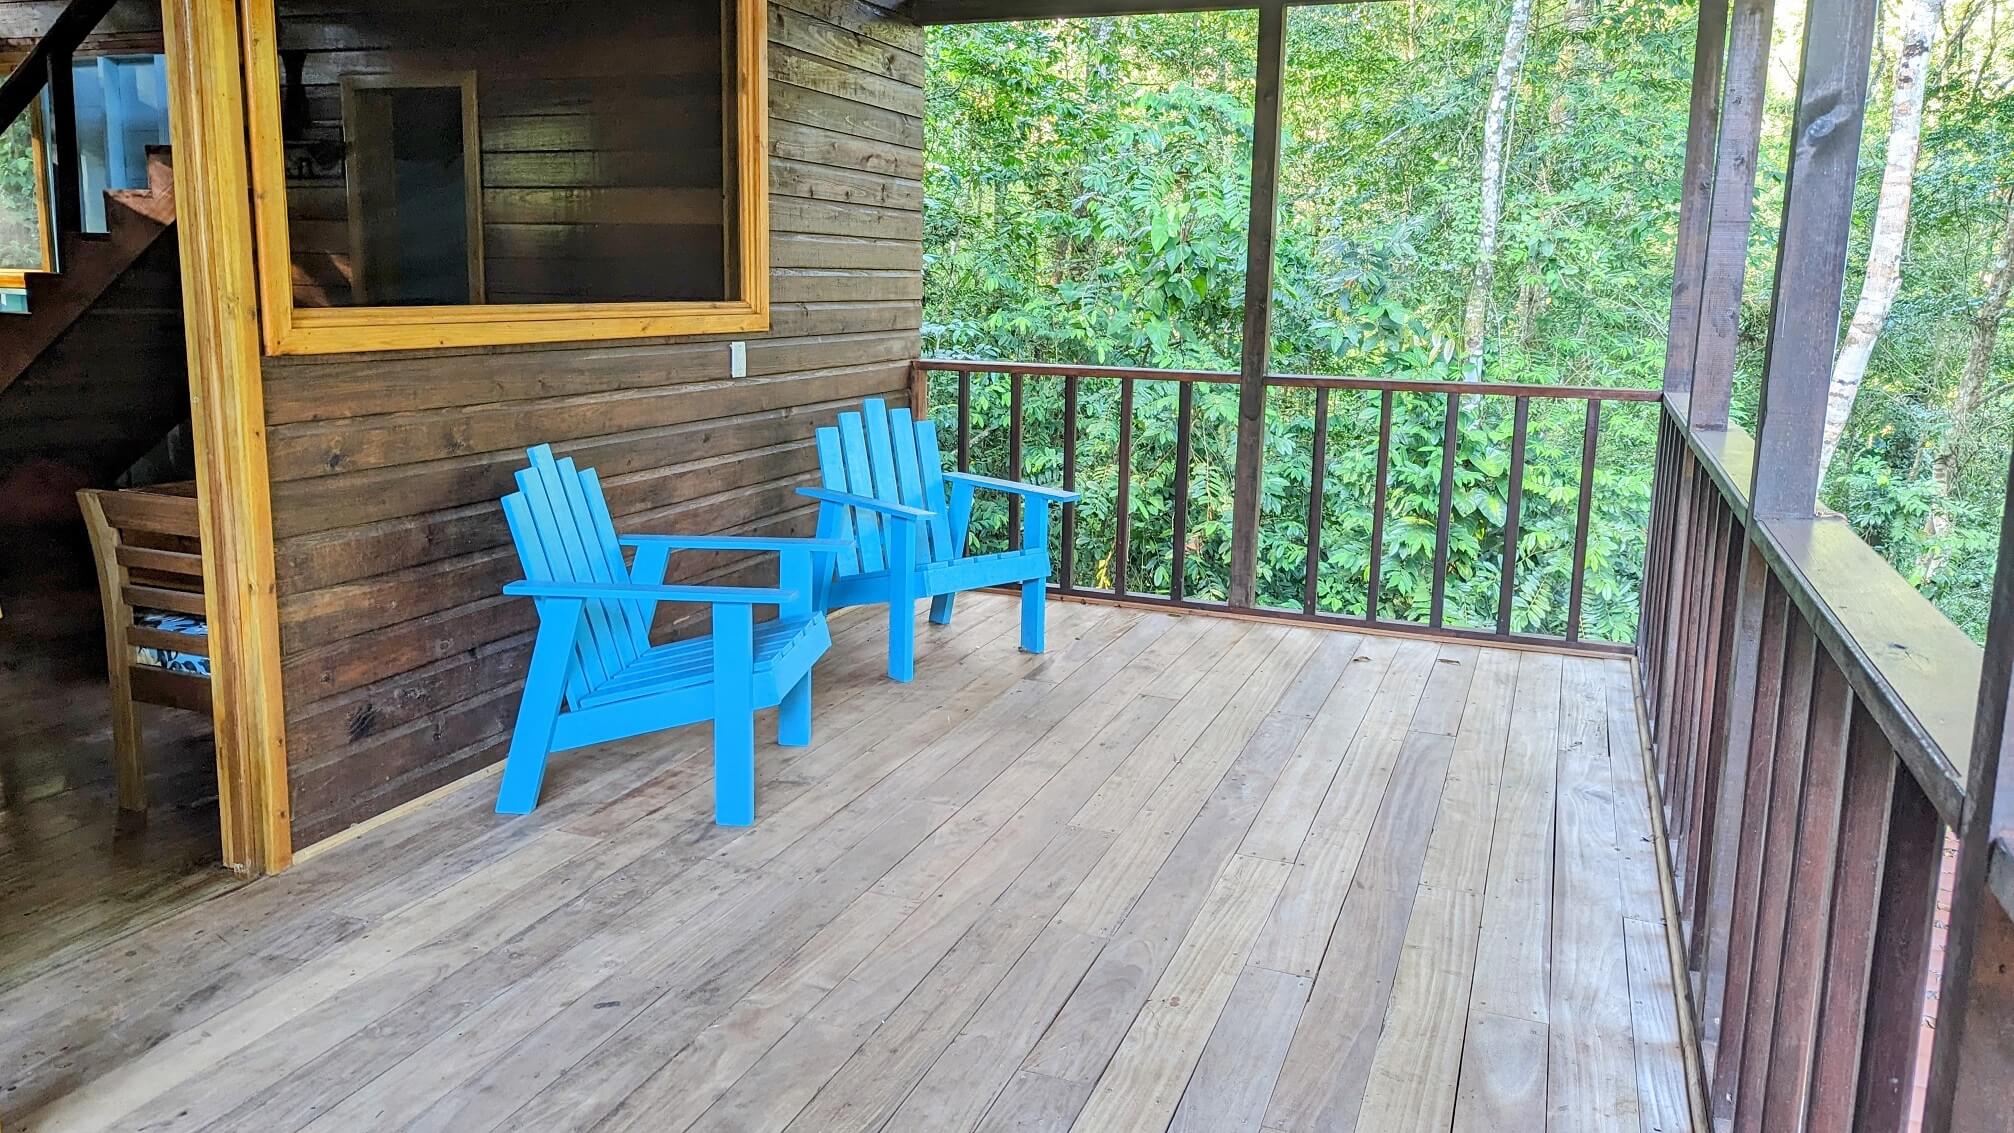 Two blue chairs on a porch with trees in the background.